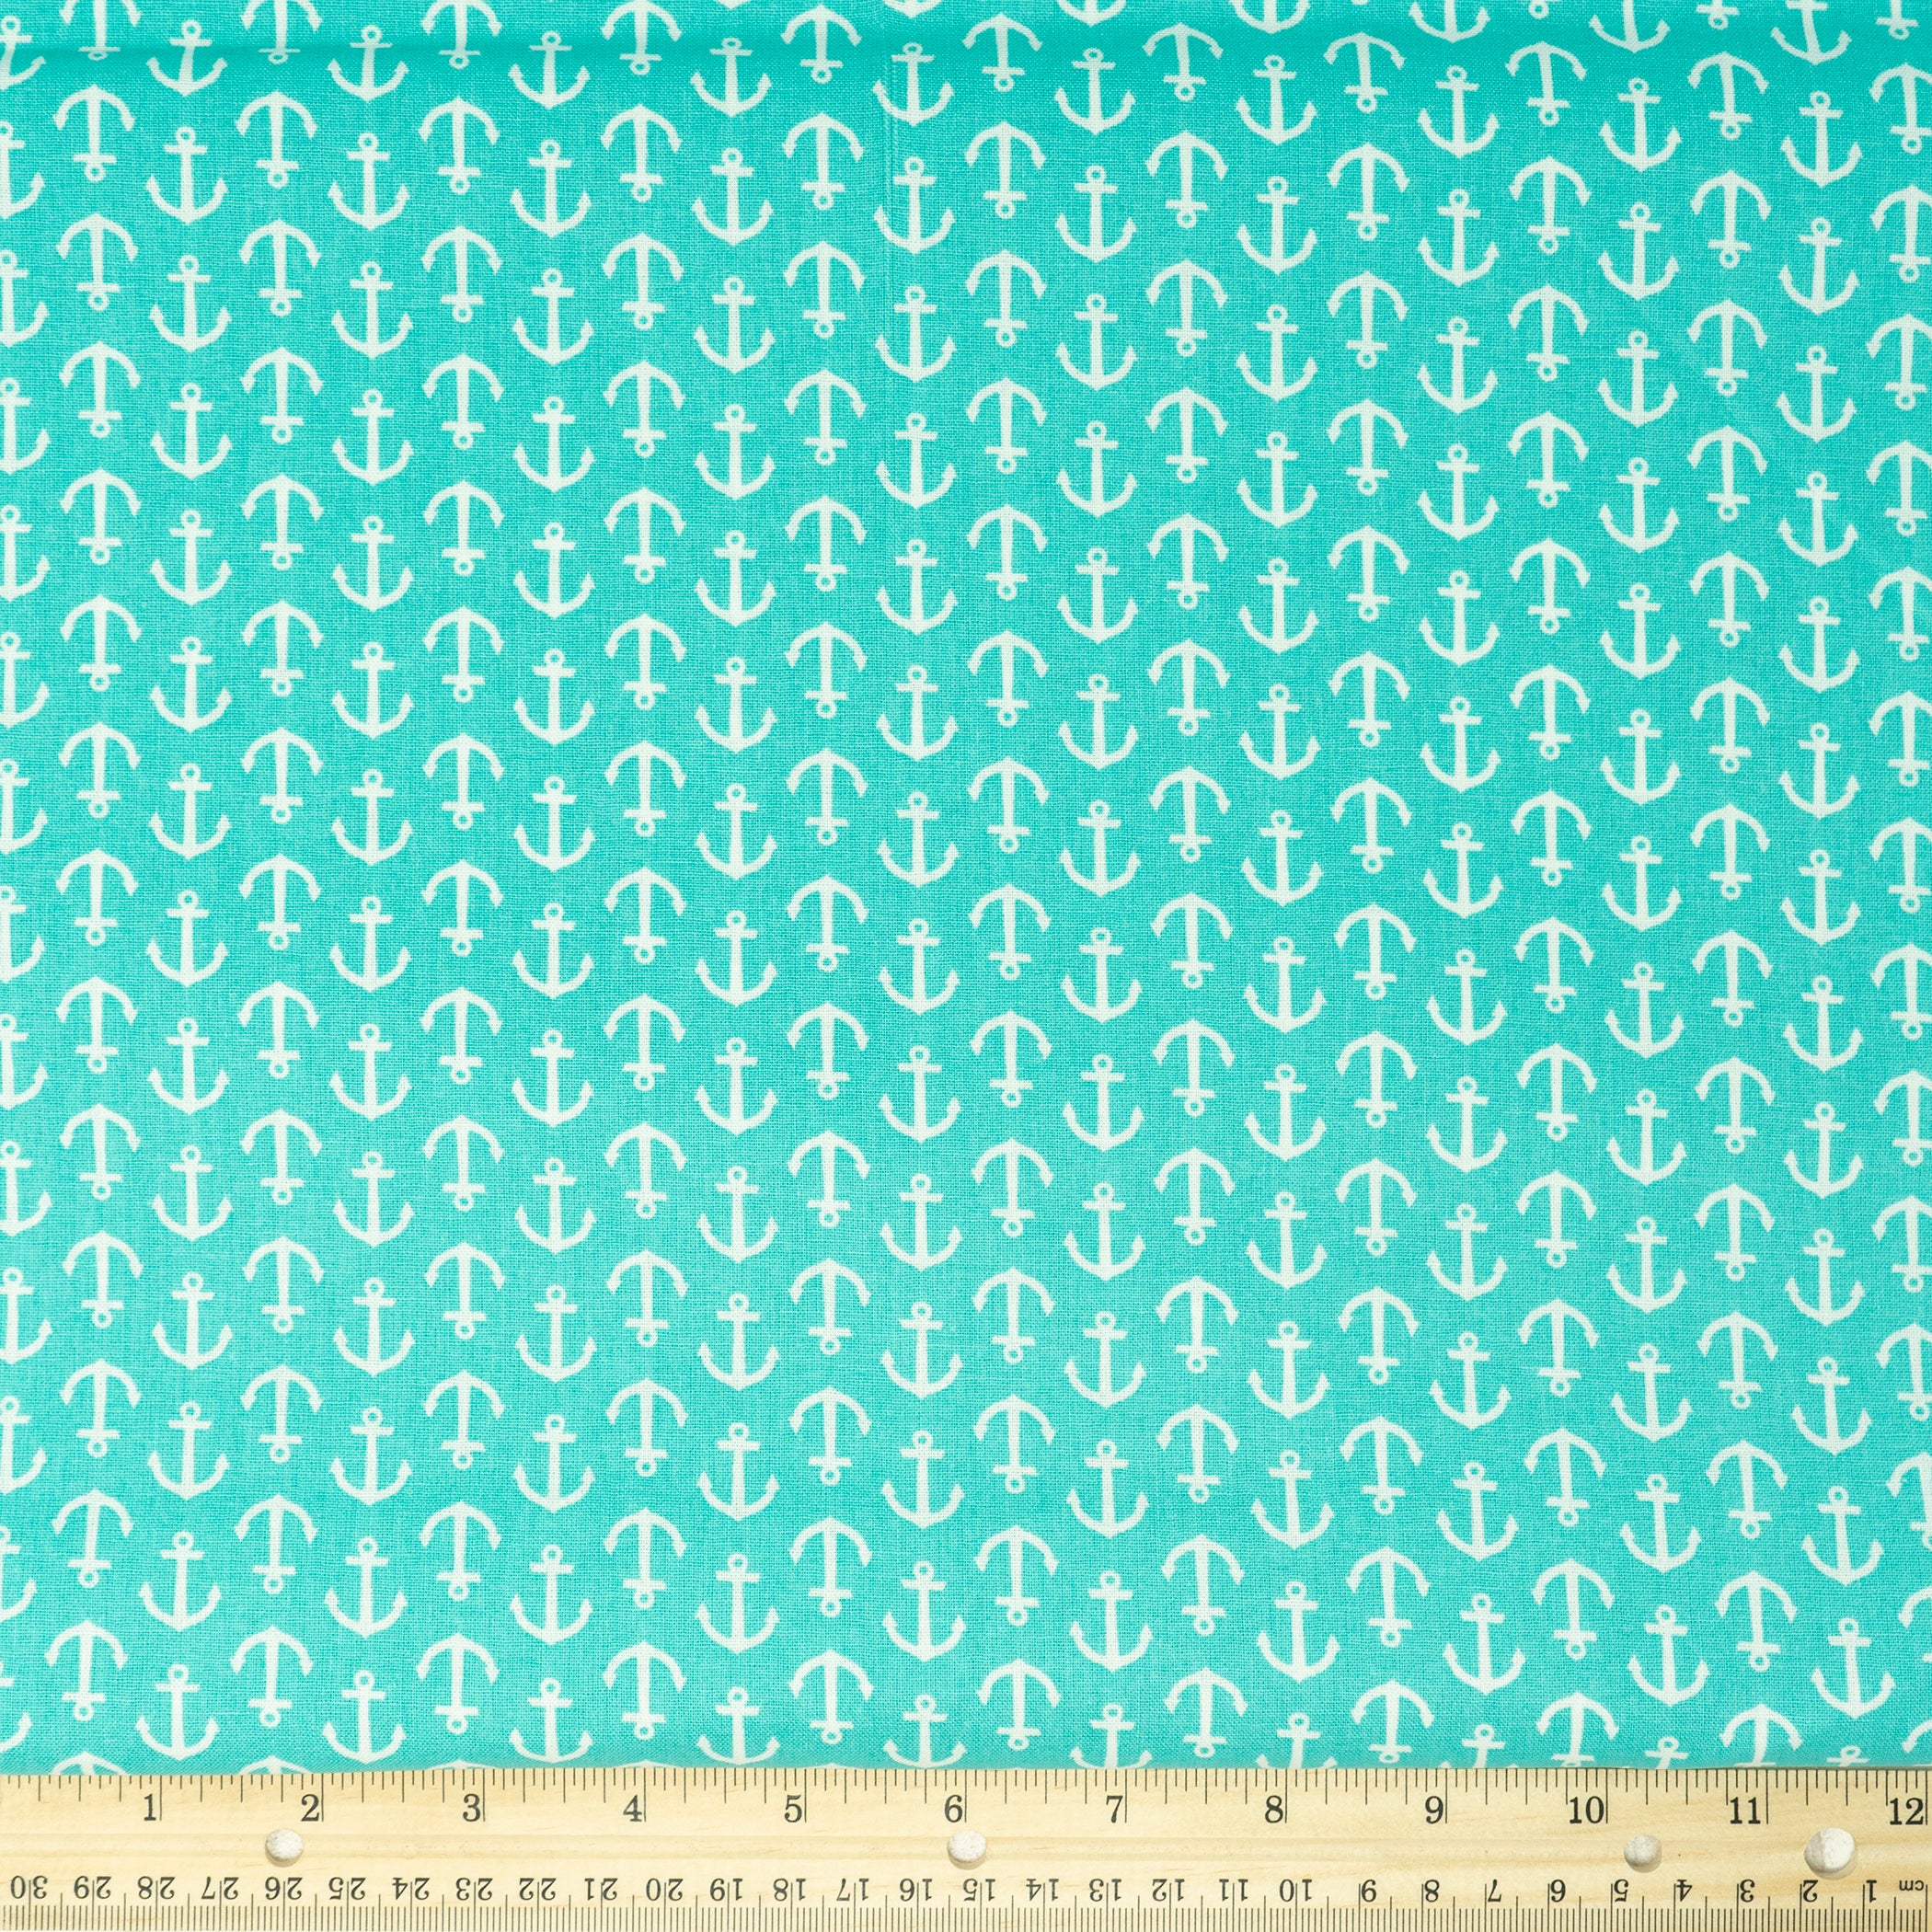 Waverly Inspirations Cotton 44" Anchor Aqua White Color Sewing Fabric by the Yard